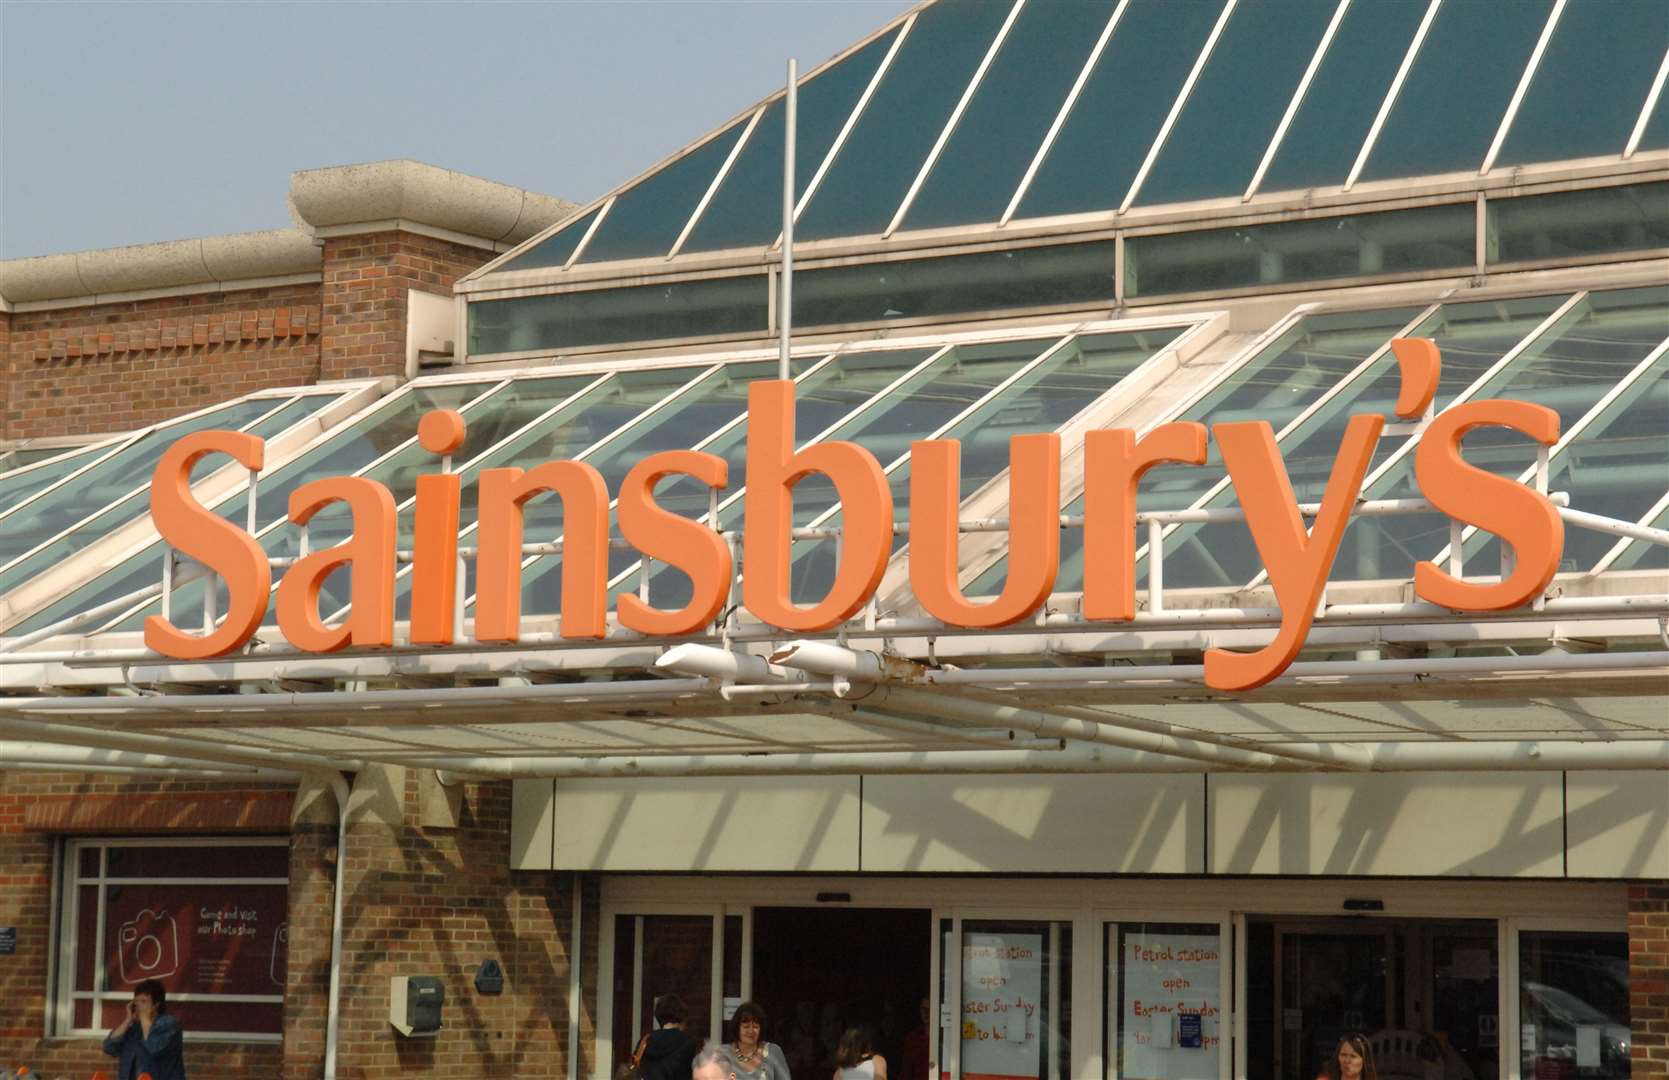 Sainsbury’s has been a reliable employer for youngsters for generations